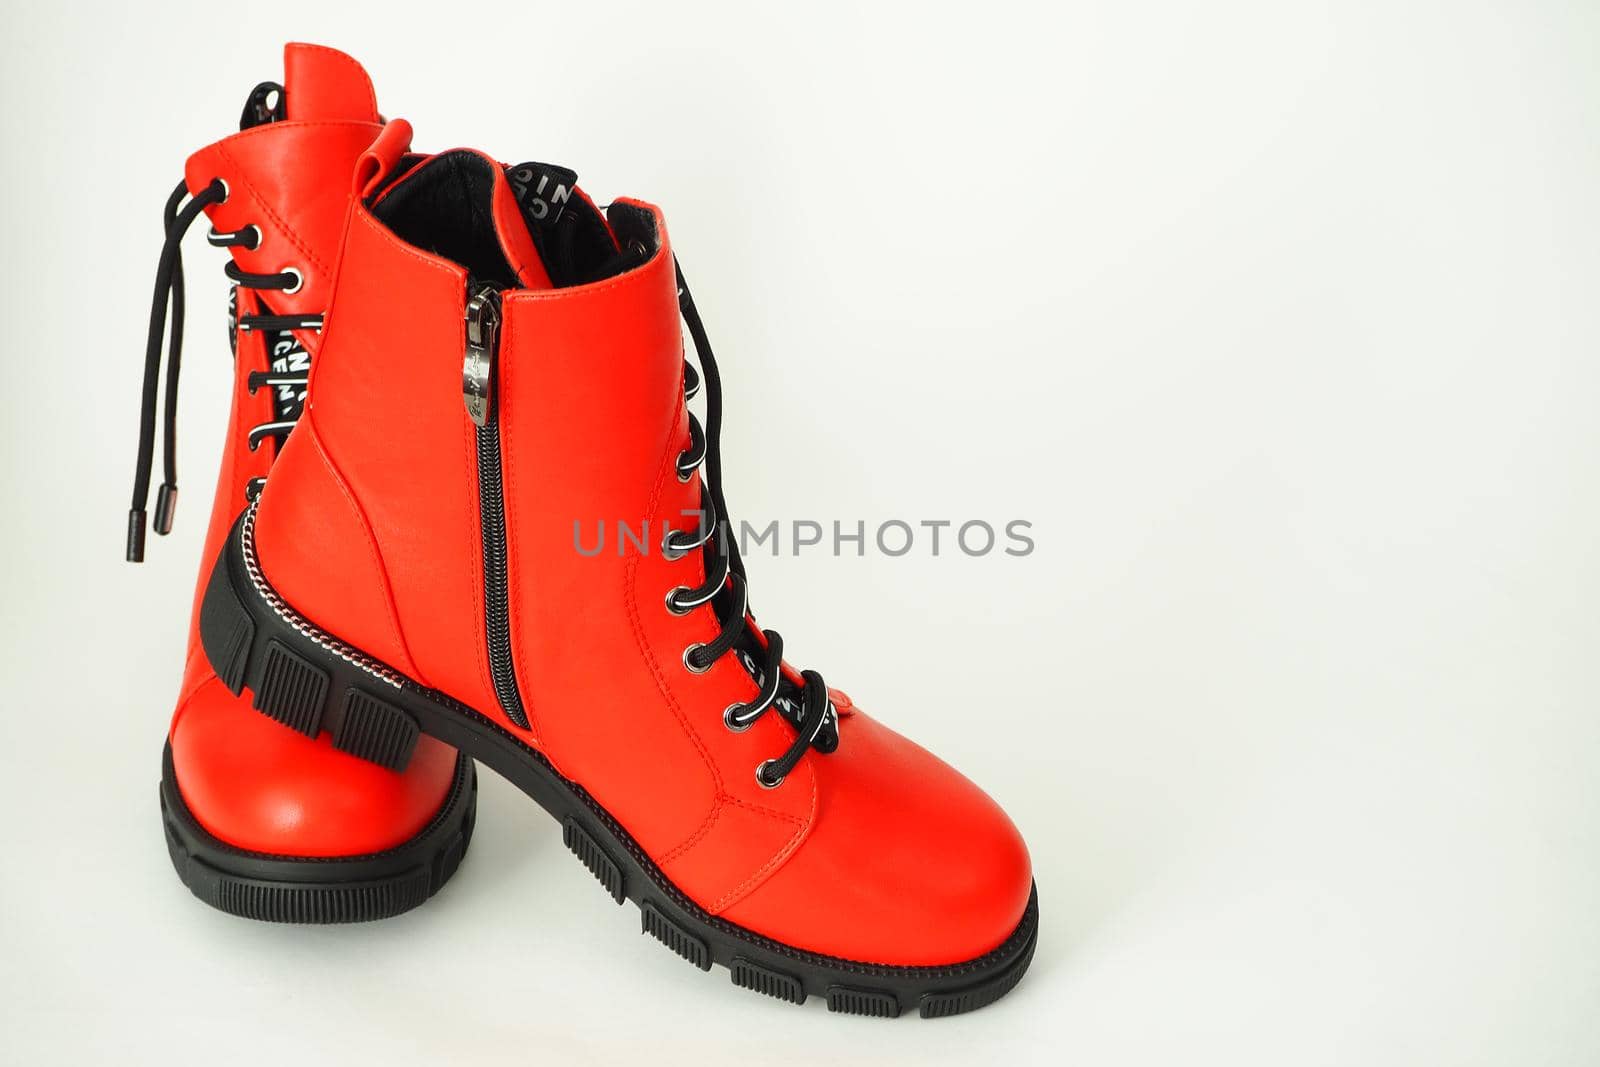 Fashionable women's shoes are red, with zipper and lacing, insulated on a white background. High quality photo